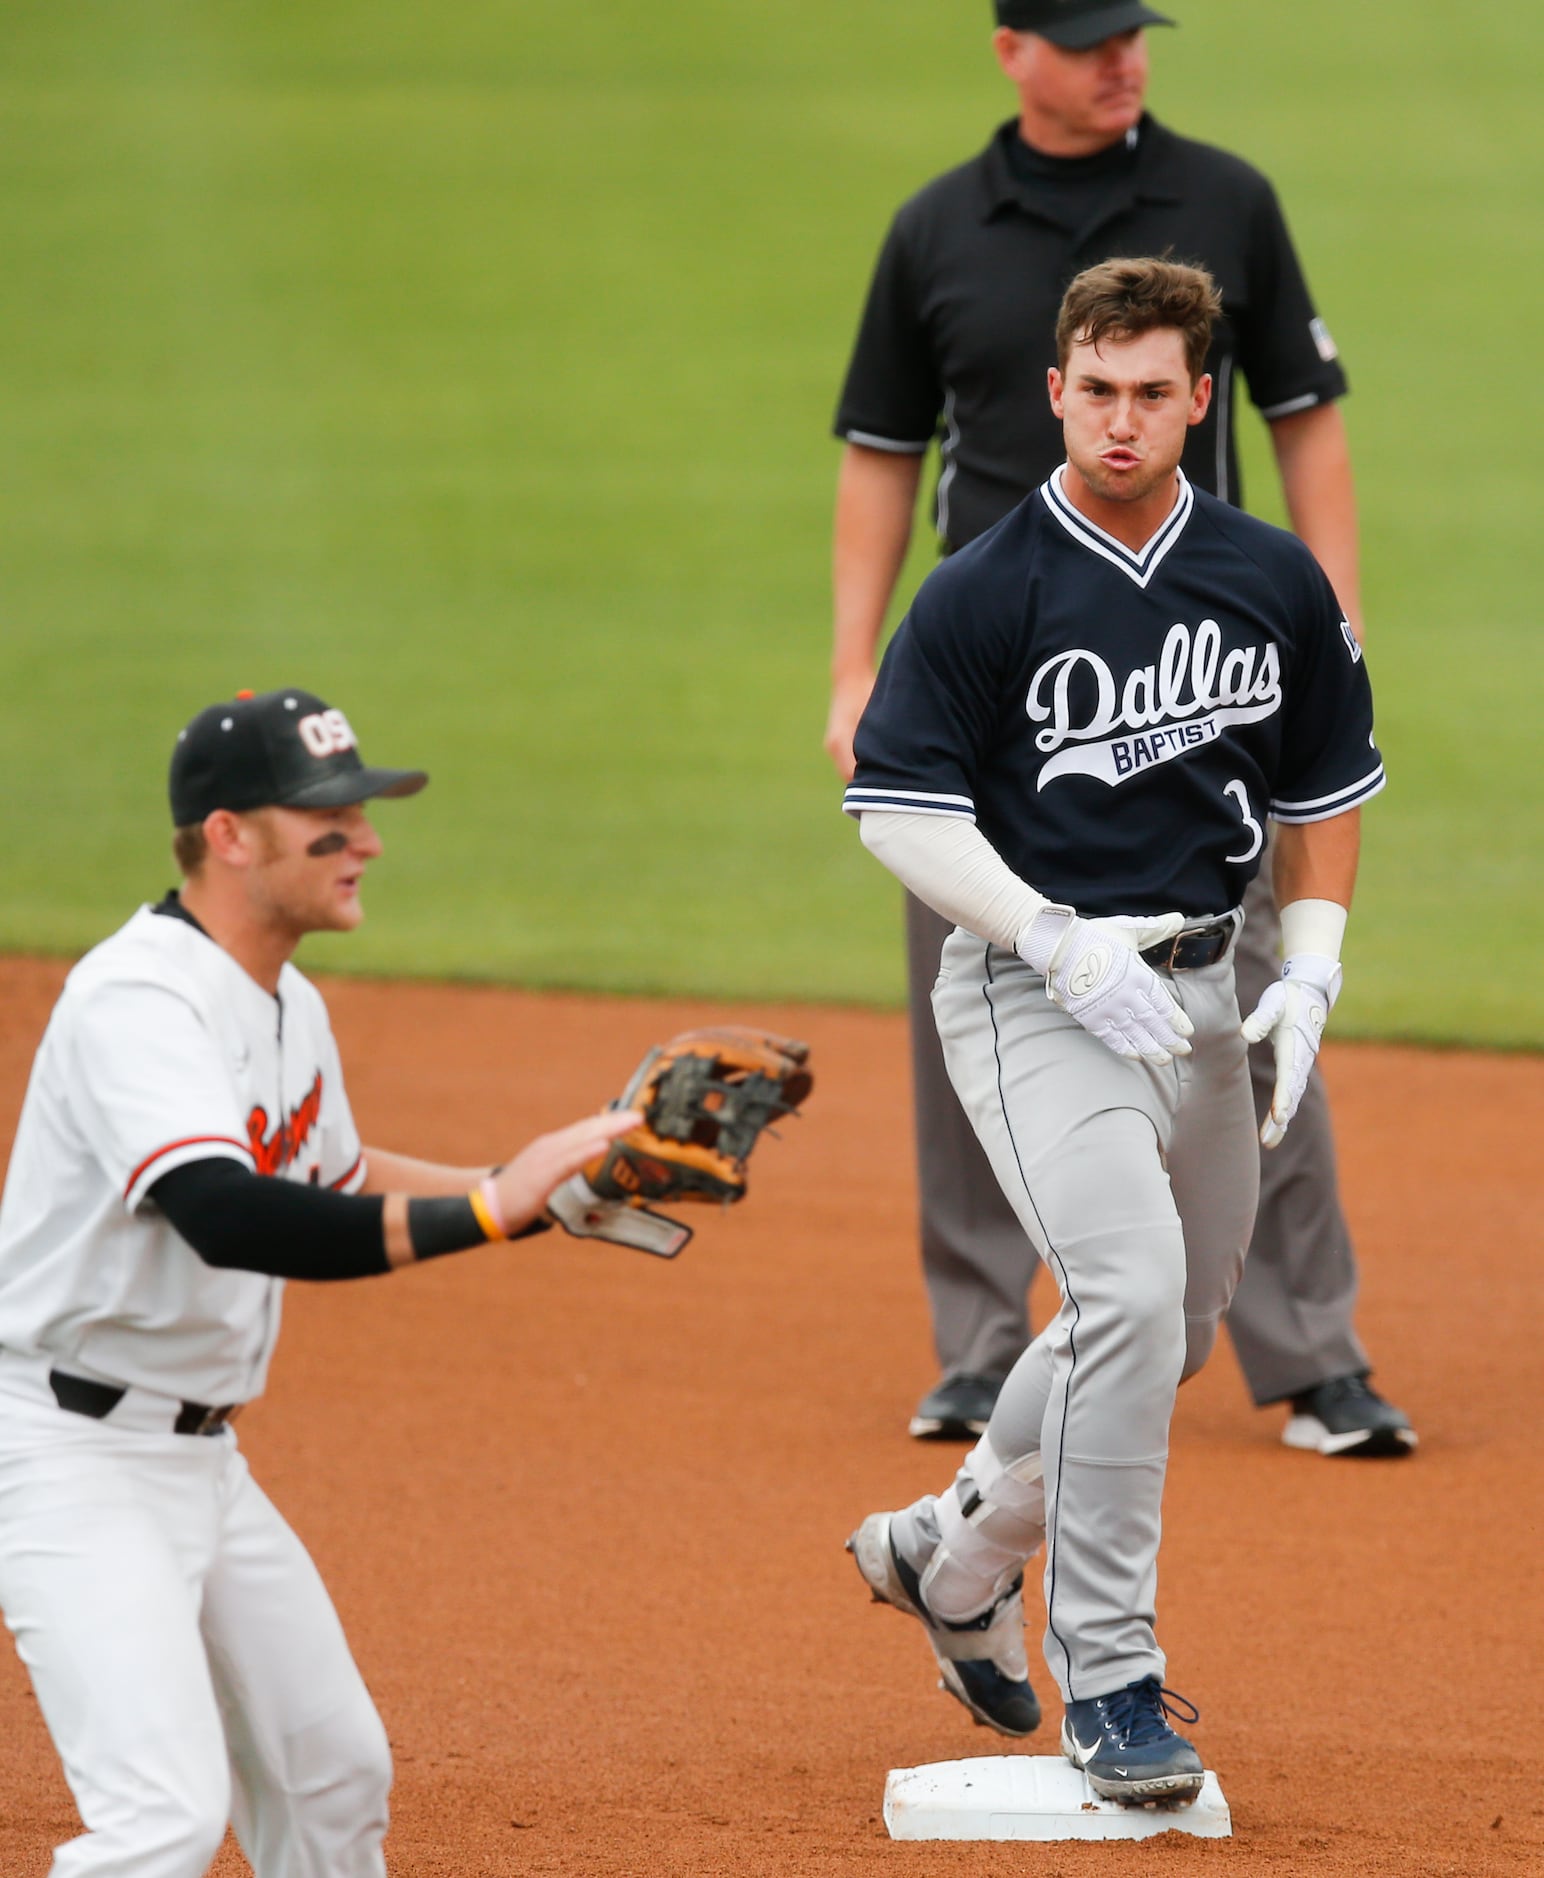 Does Oregon State have the best middle infield in college baseball?